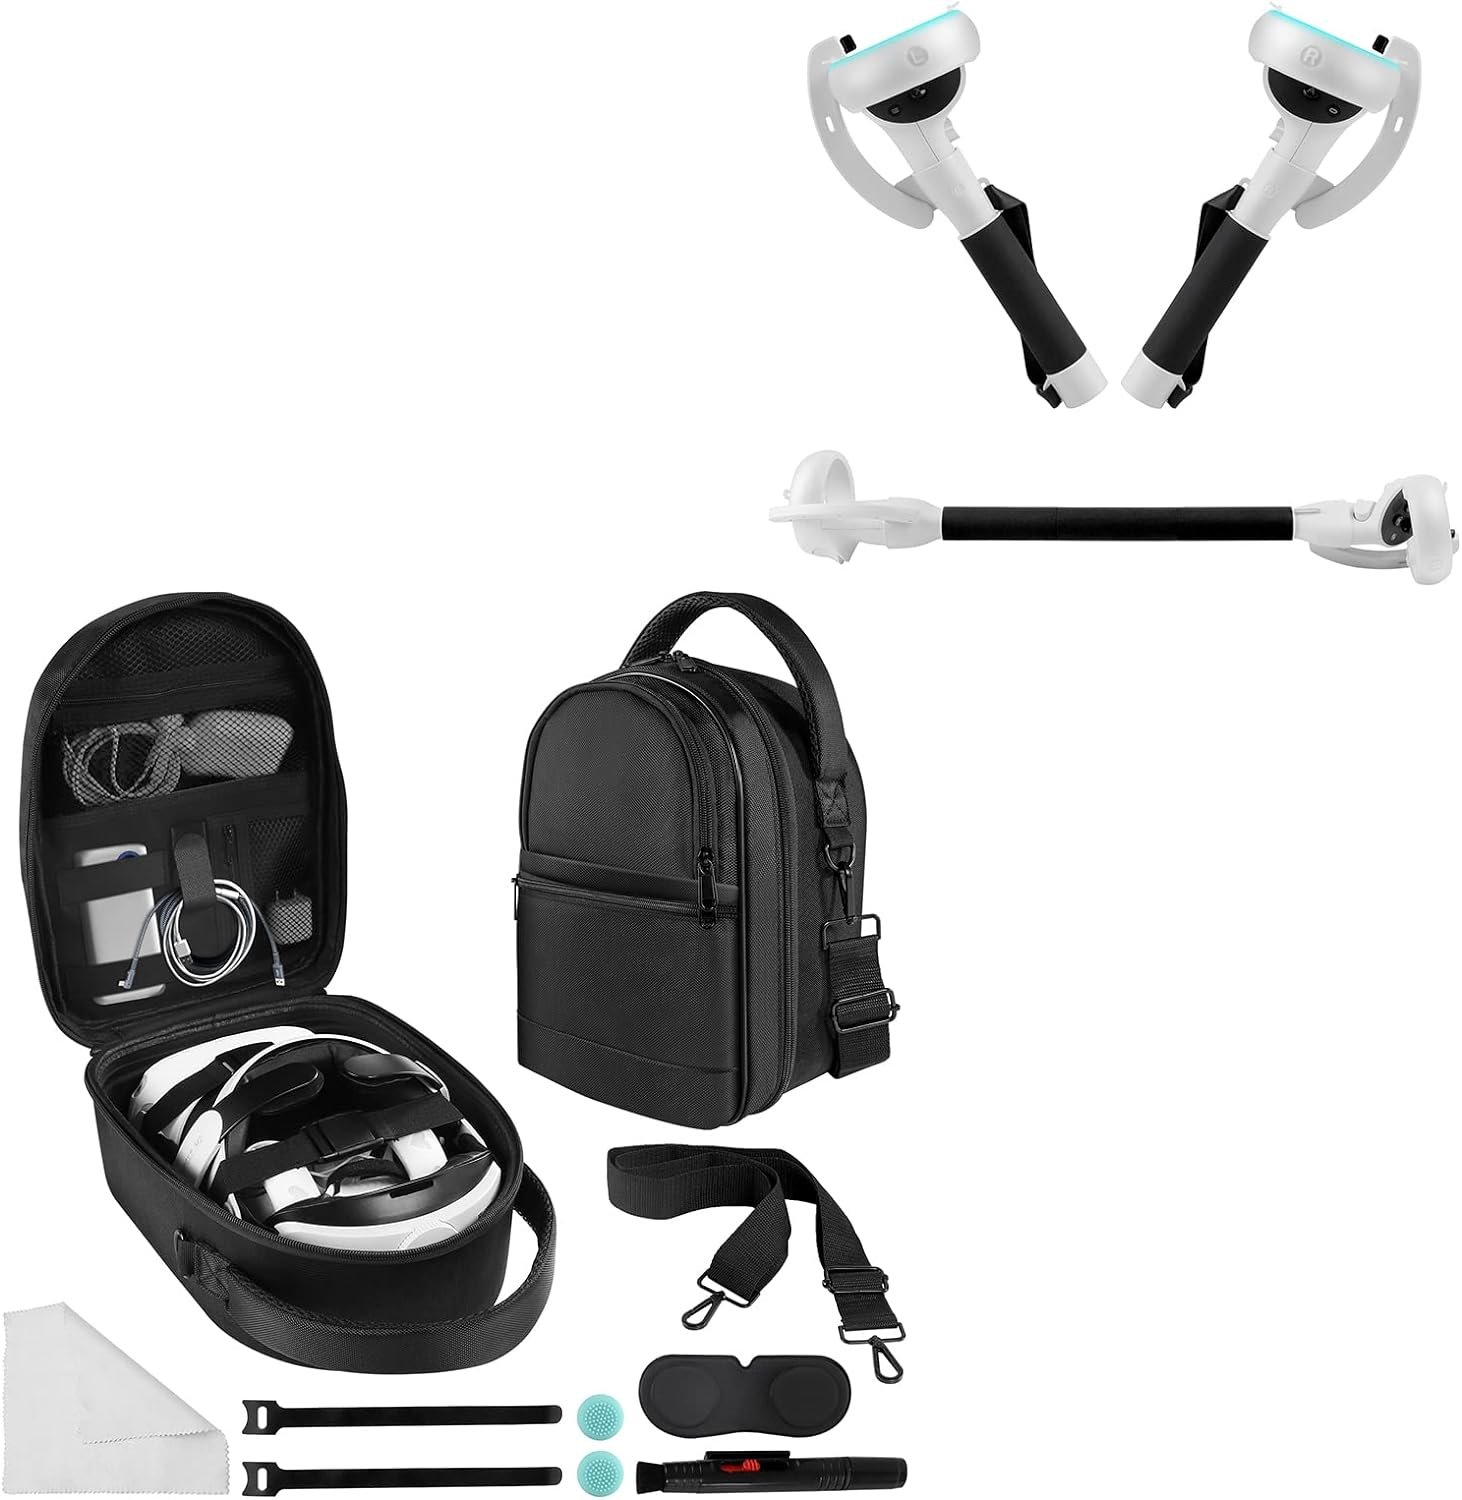 Carrying Case Fits Most Head Straps for Meta/Oculus Quest 2 + Controller Attachment Compatible with Meta/Oculus Quest 2 for Beat Saber Supernatural Gorilla Tag Golf Club Games